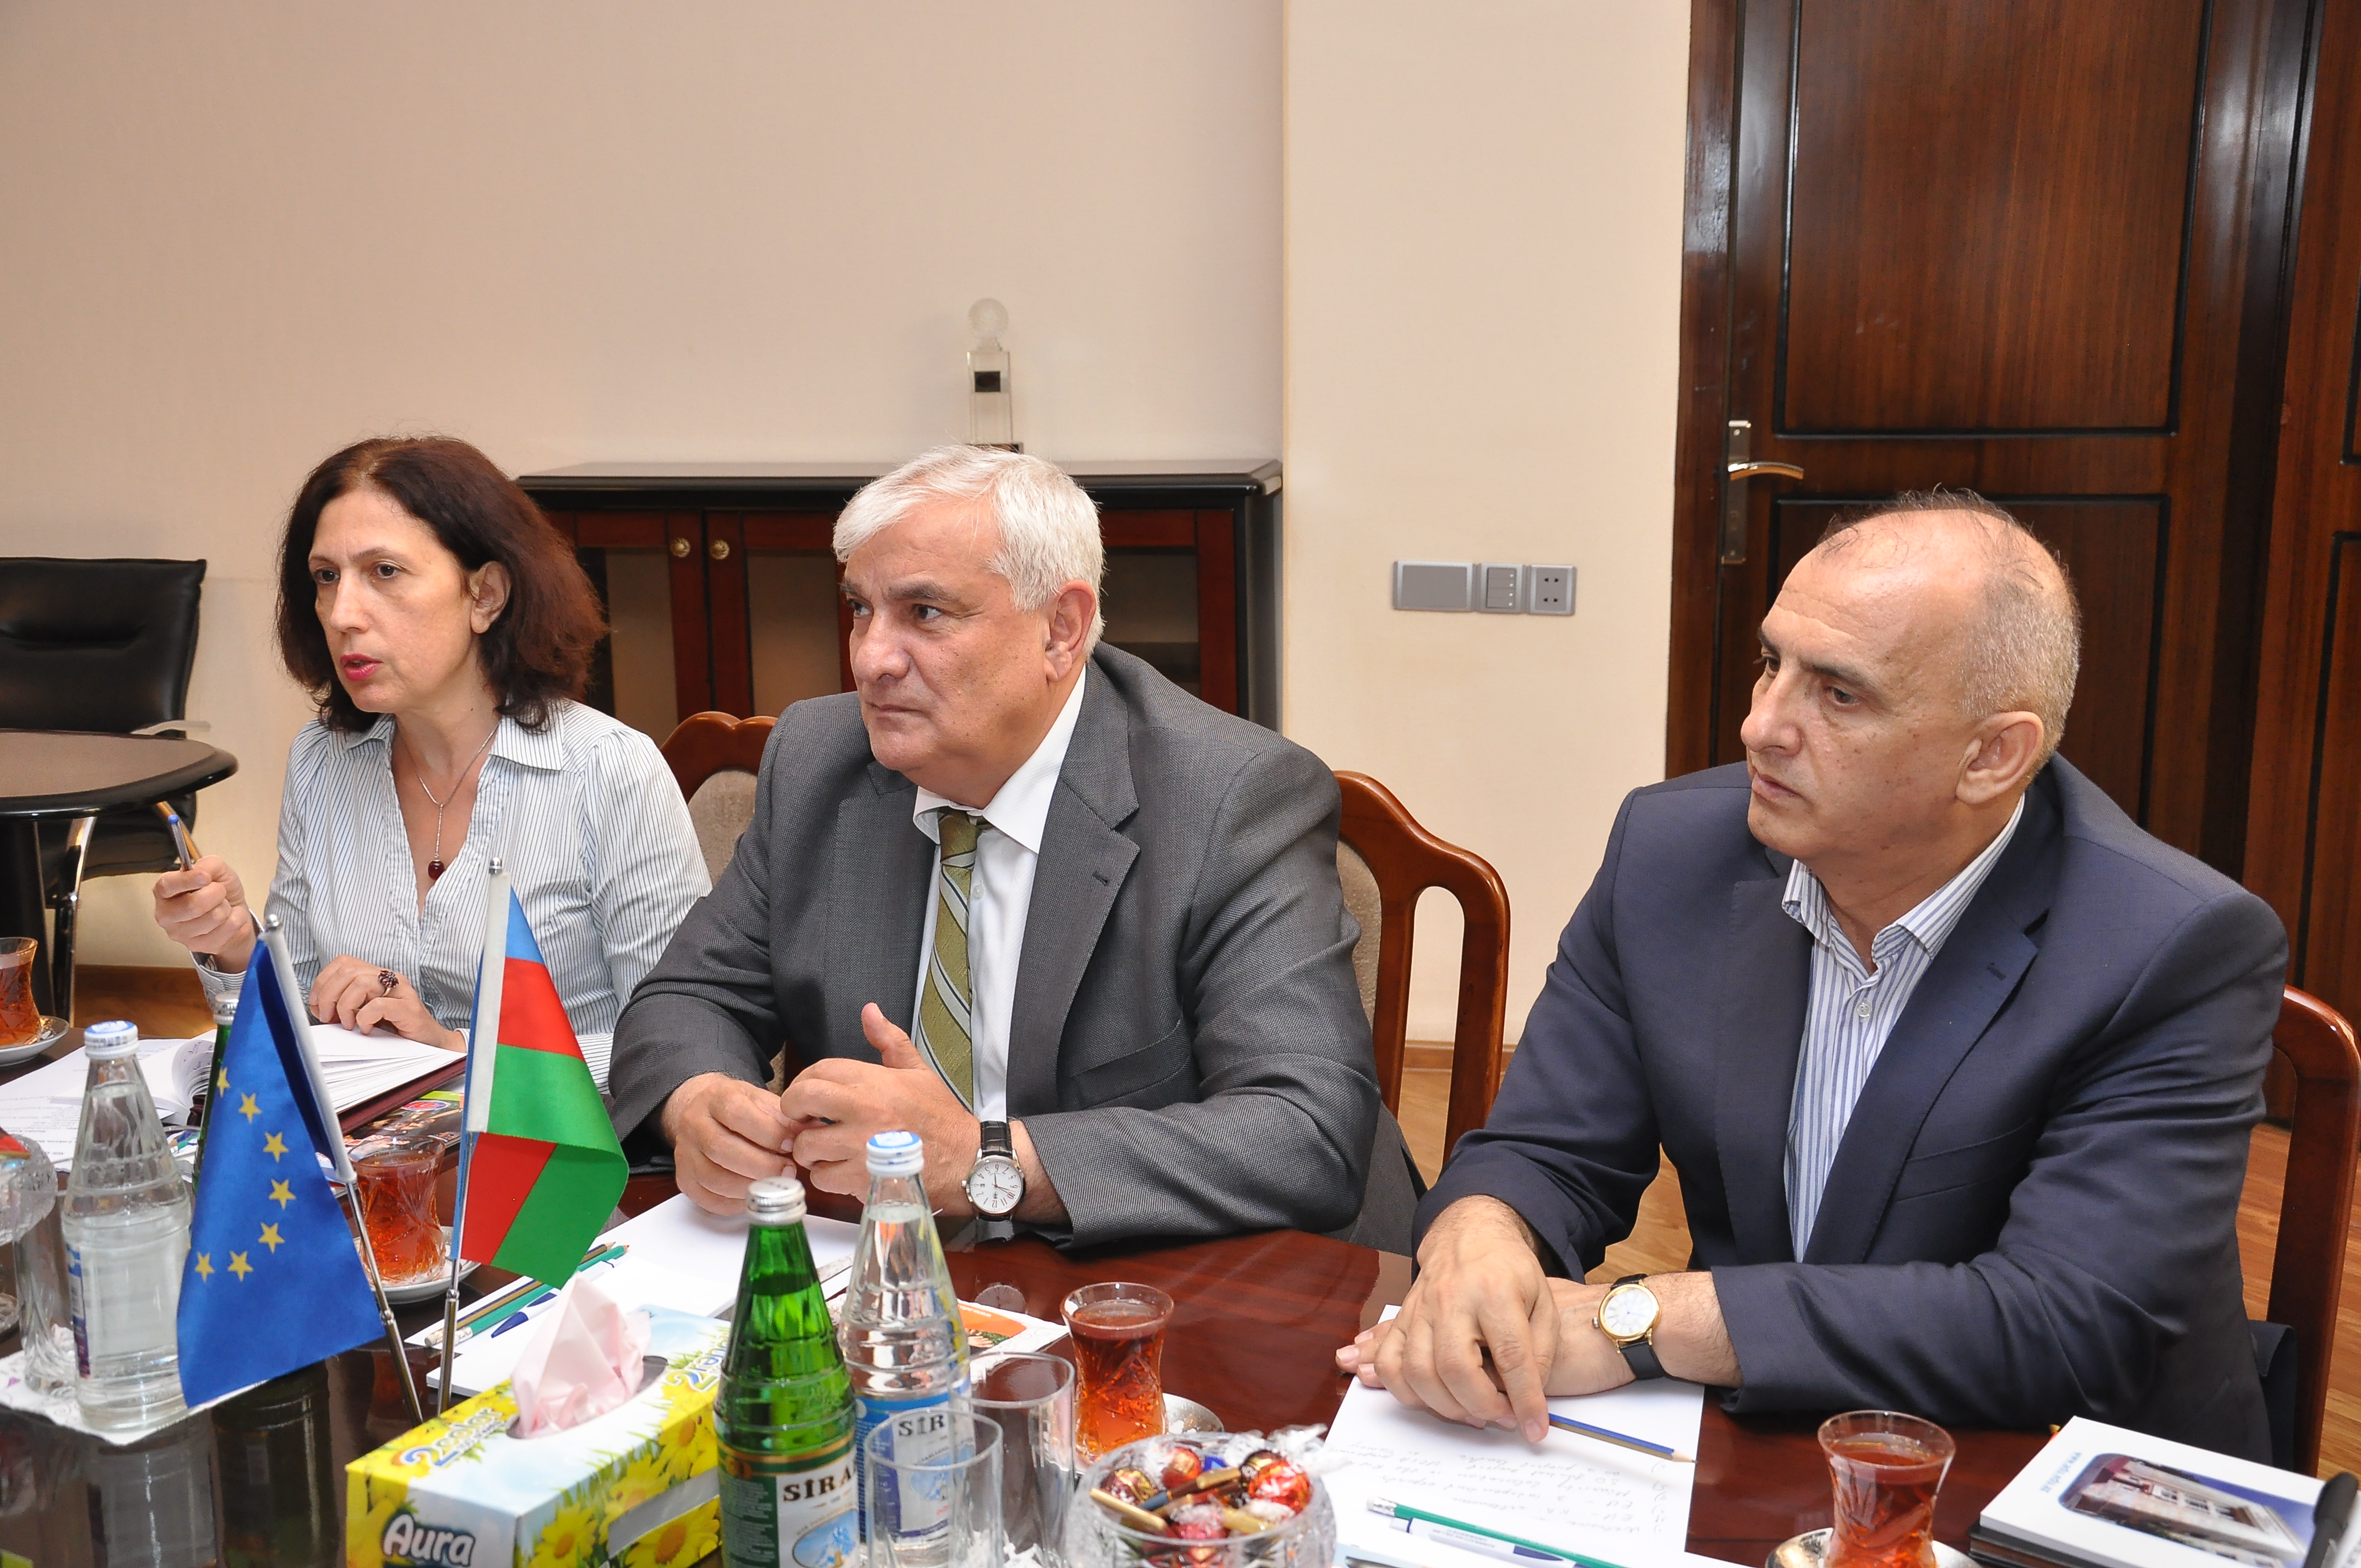 Rector of AUL Kamal Abdulla met with the delegation of the Council of Europe